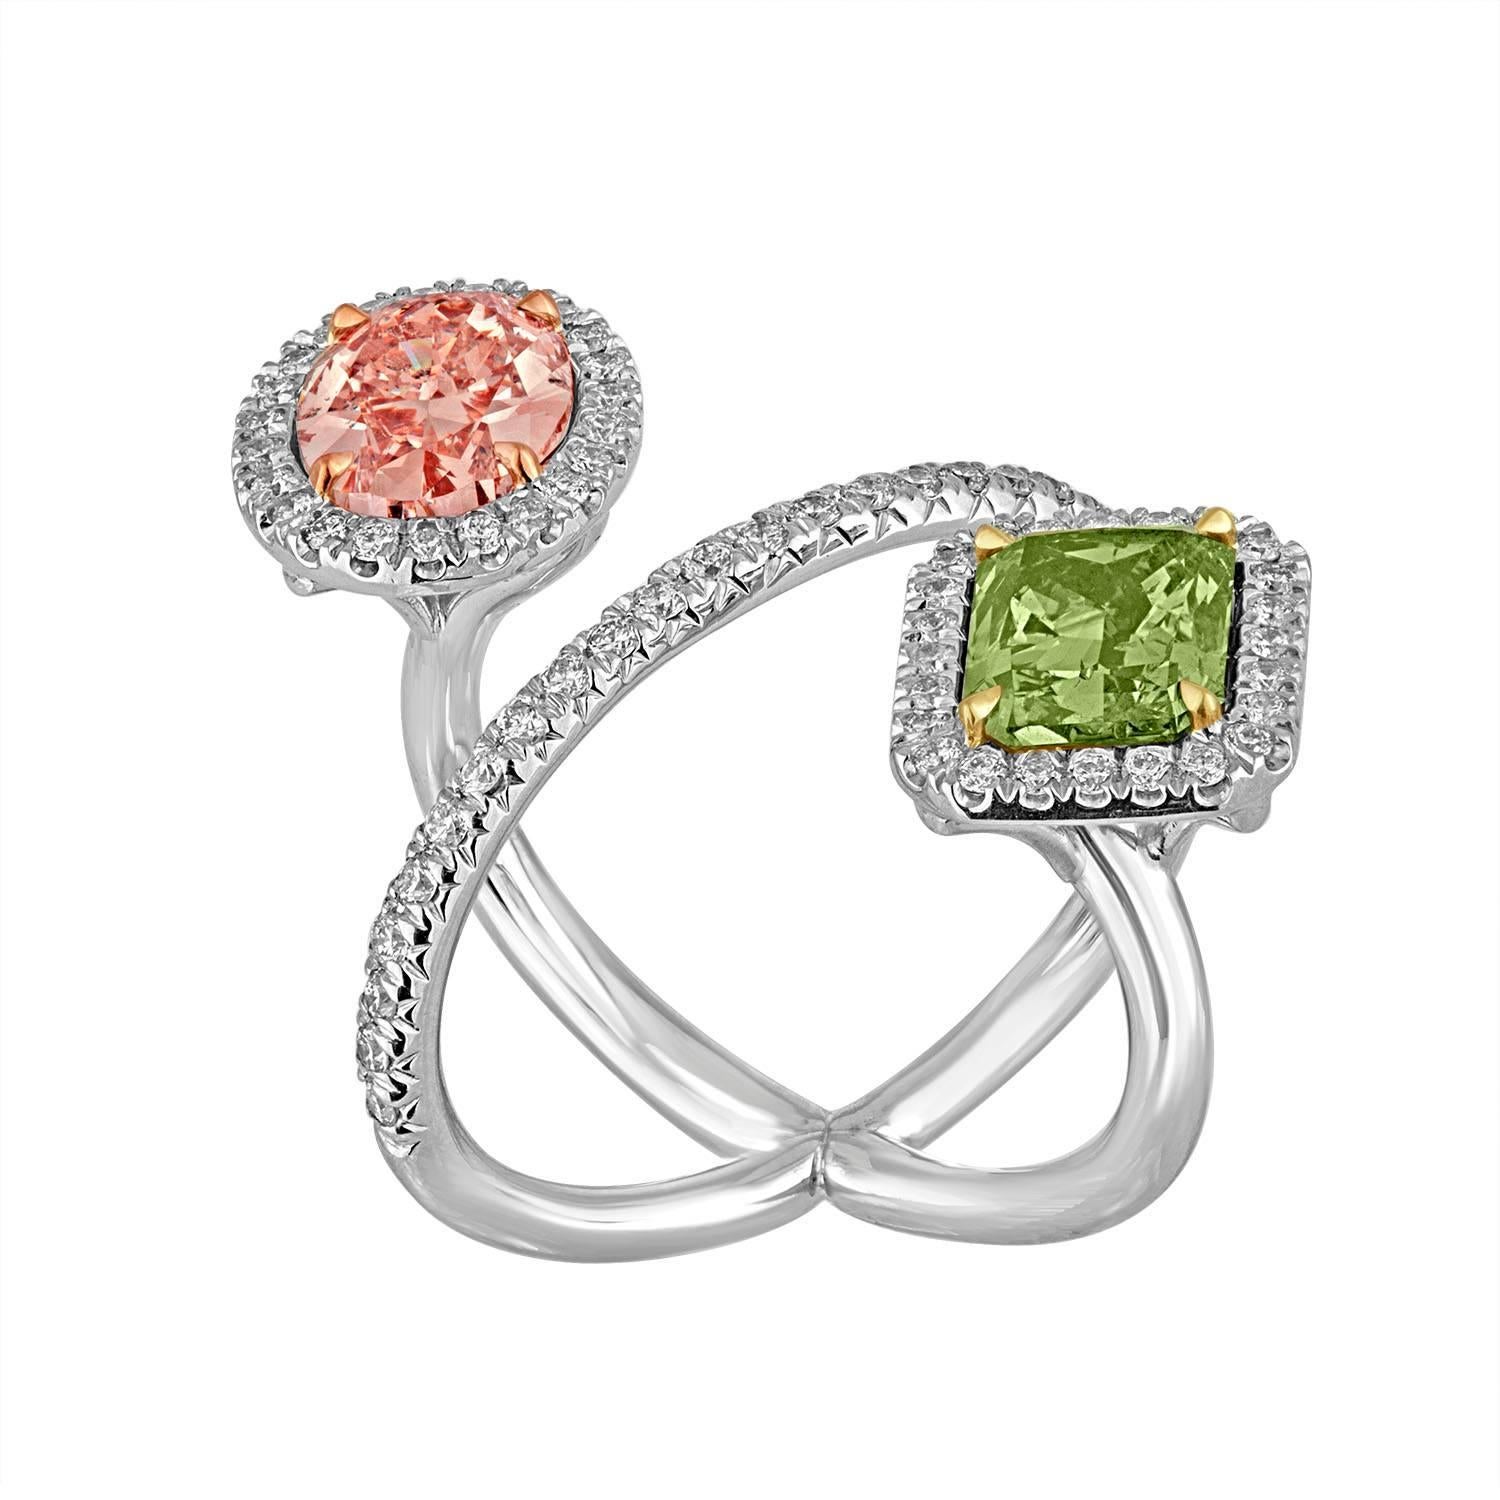 A 2.15 Carat Oval, GIA Fancy Brown Pink is set with a beautiful 2.40 Carat Cushion GIA “CHAMELEON”, Fancy Deep Grayish Yellowish Green Diamond. The stones are set in an Elegant 18k White Gold Ring.
The Two center Diamonds are set with white melee,